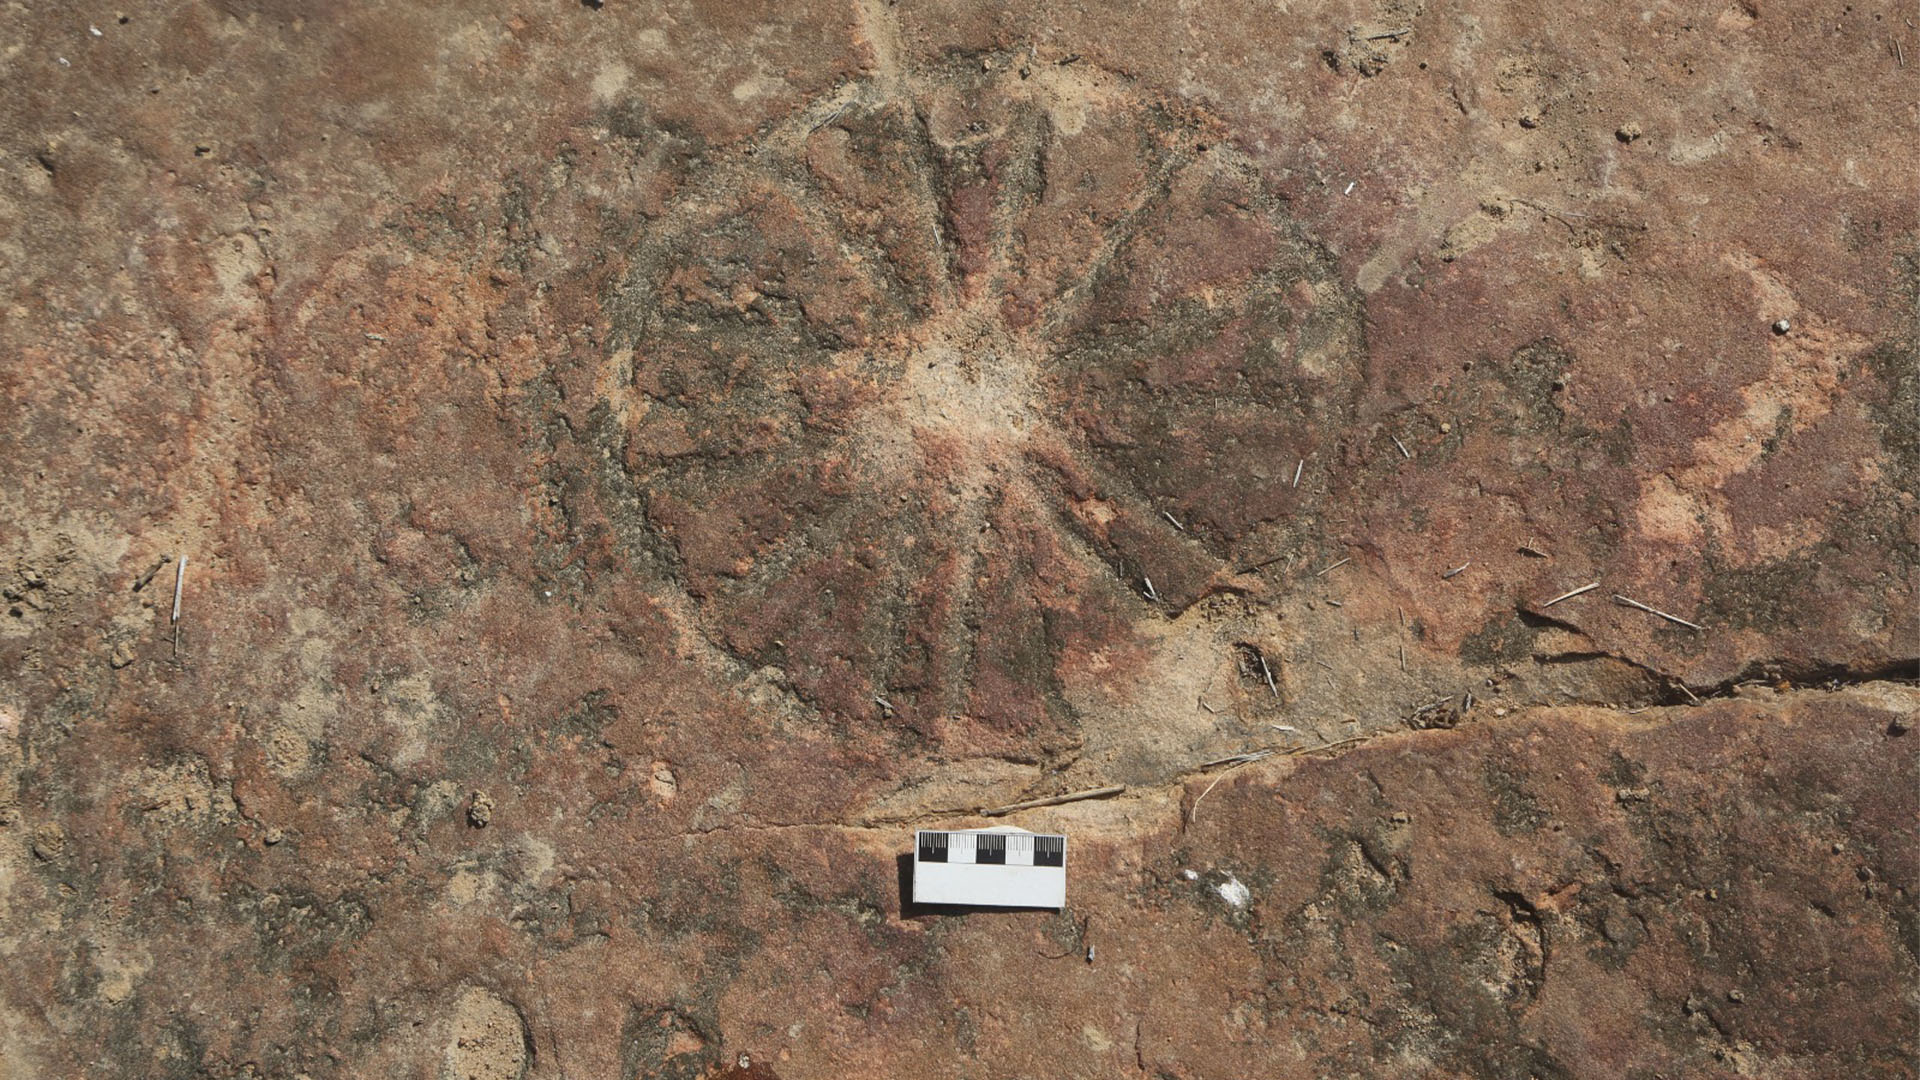 Rock art is attributed to small seminomadic groups of hunter-gatherers.